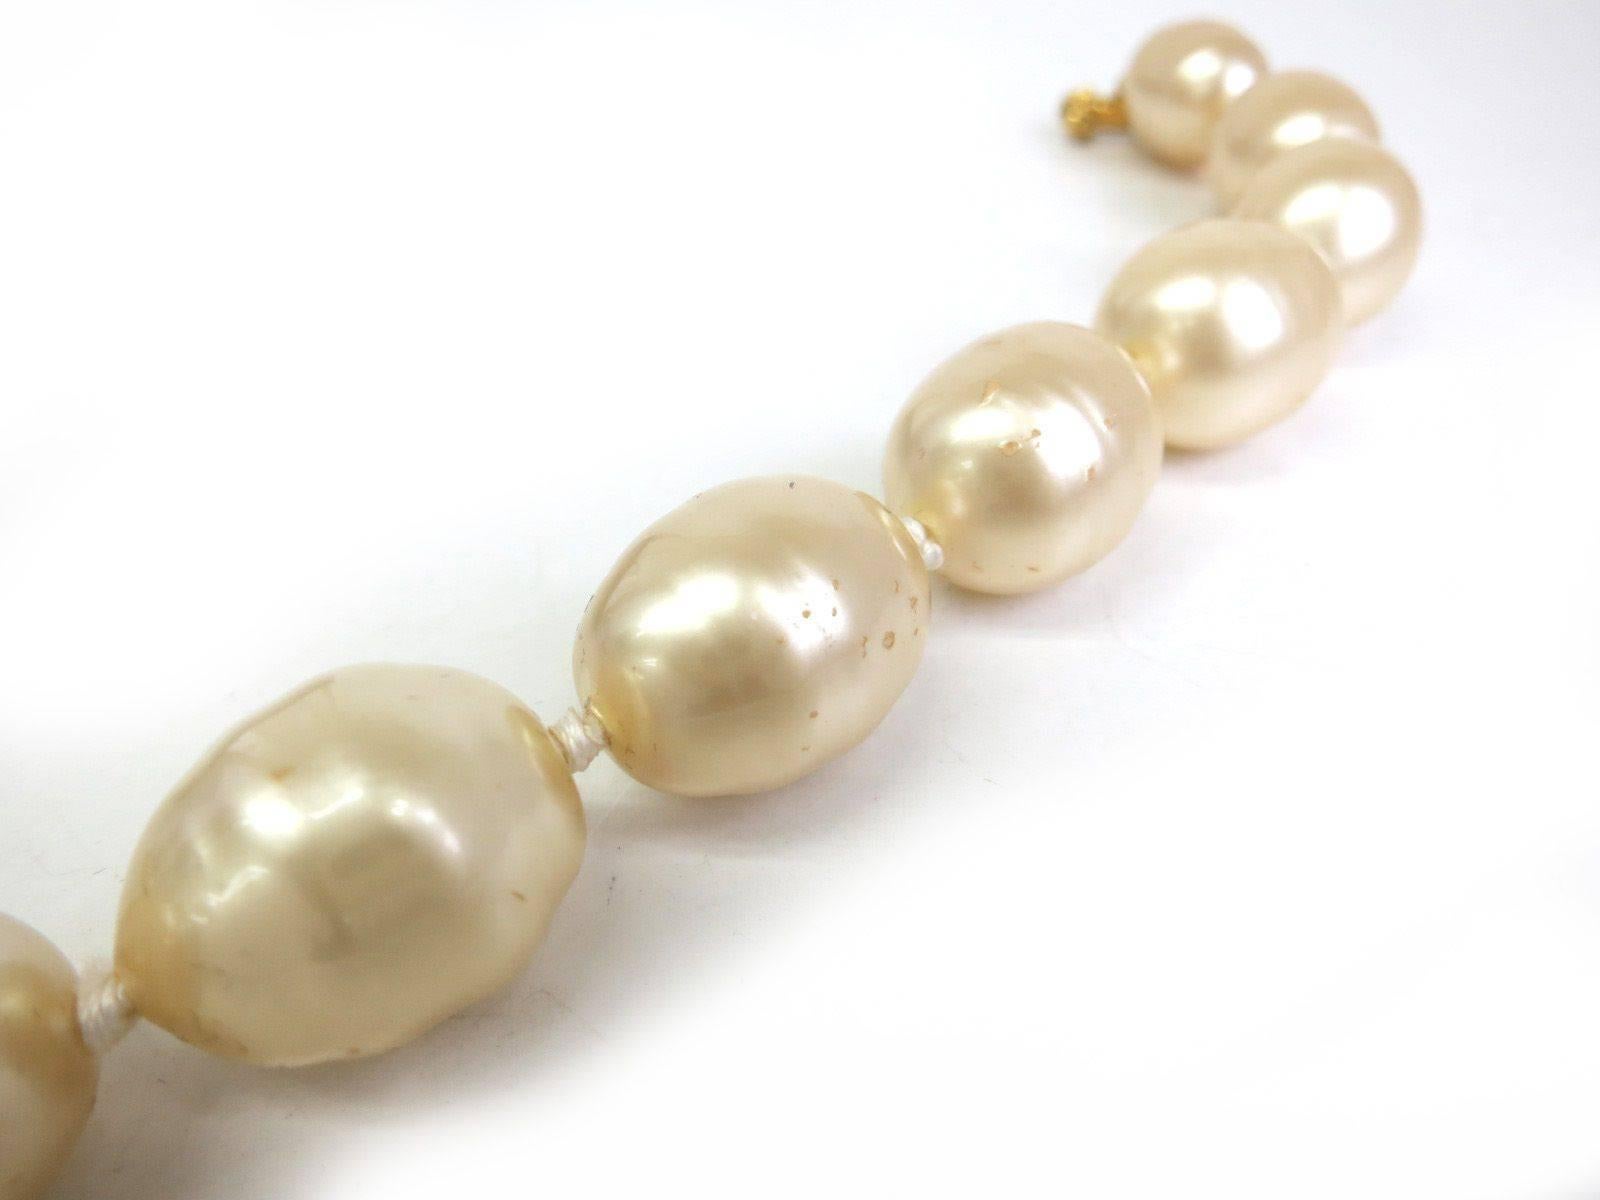 CURATOR'S NOTES

YOWZA!  LIMITED TIME PRICE REDUCTION!

Ladies love pearls--and even more if they are Chanel!  Elegant single strand Chanel pearls featuring beautiful gold toggle closure.  A must-have for vintage Chanel connoisseurs! 

Gold